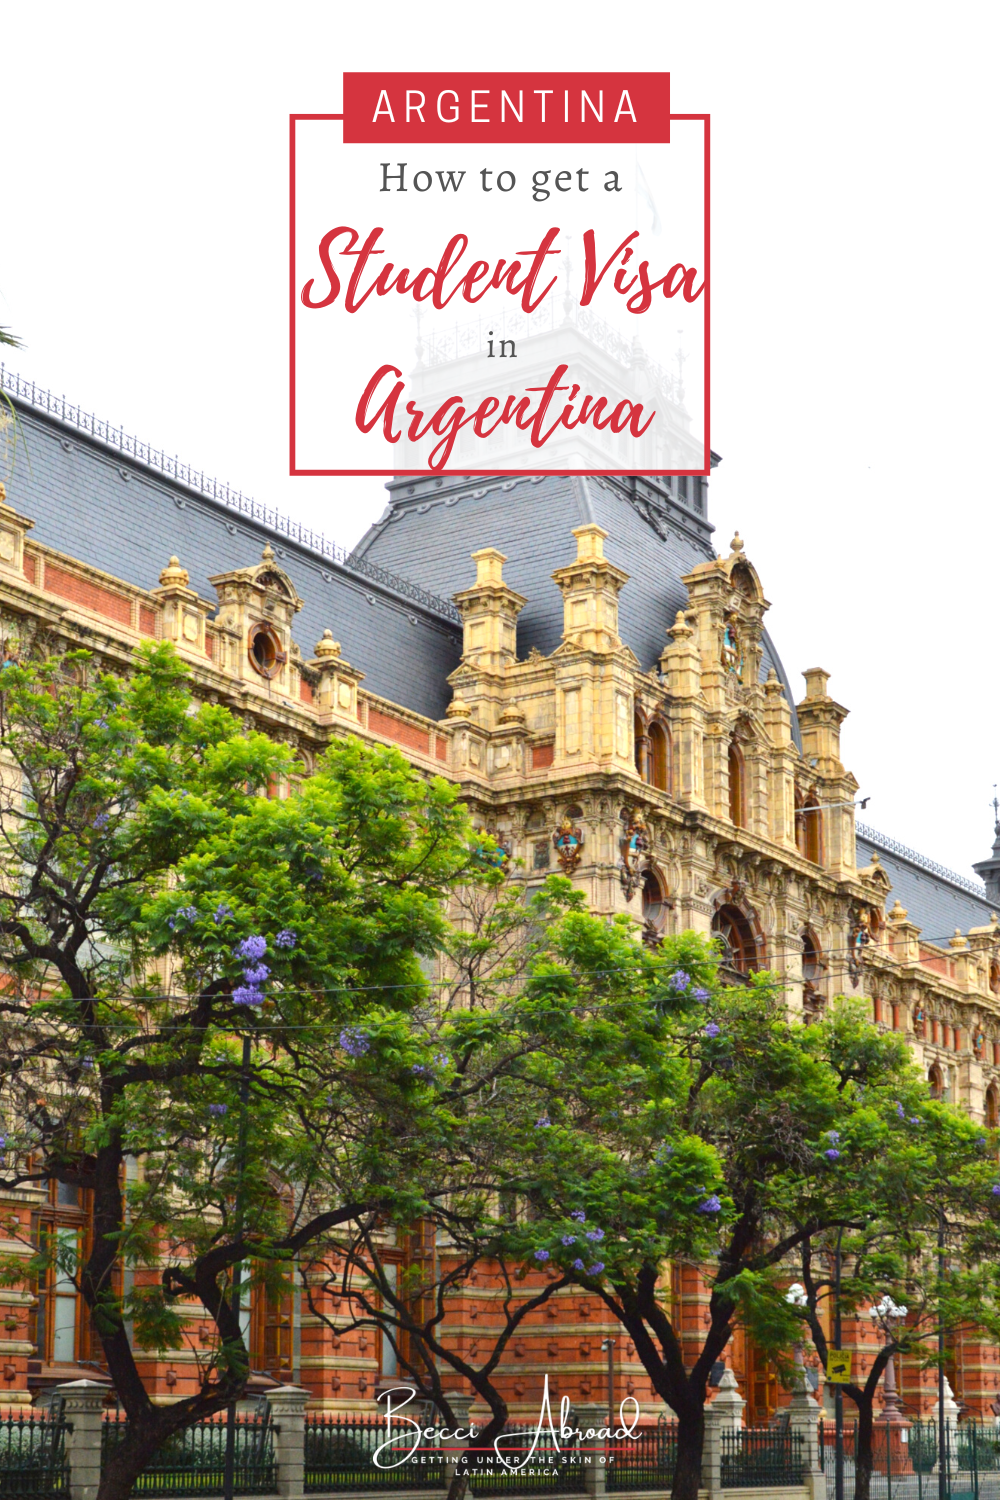 The Complete Guide on How to Get a Student Visa in Argentina and How to Extend Your Student Visa. Keep on Reading and Get All the Information!